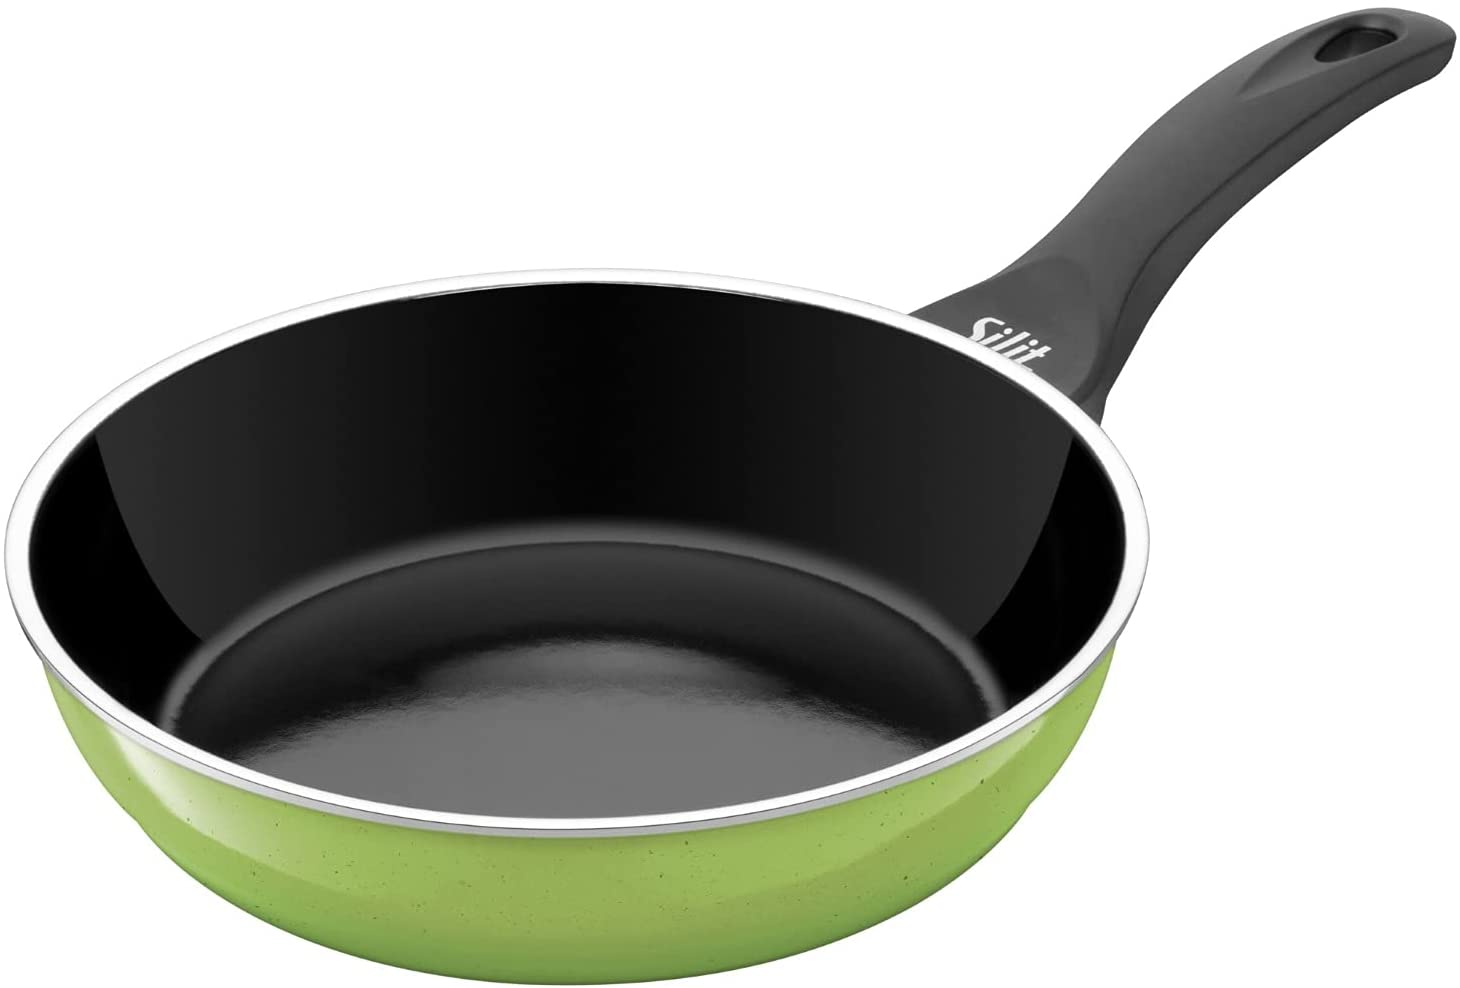 Silit Frying Pan Diameter 24 cm Passion Green Rim Ceramic Suitable for Induction Cookers Dishwasher Safe Made in Germany